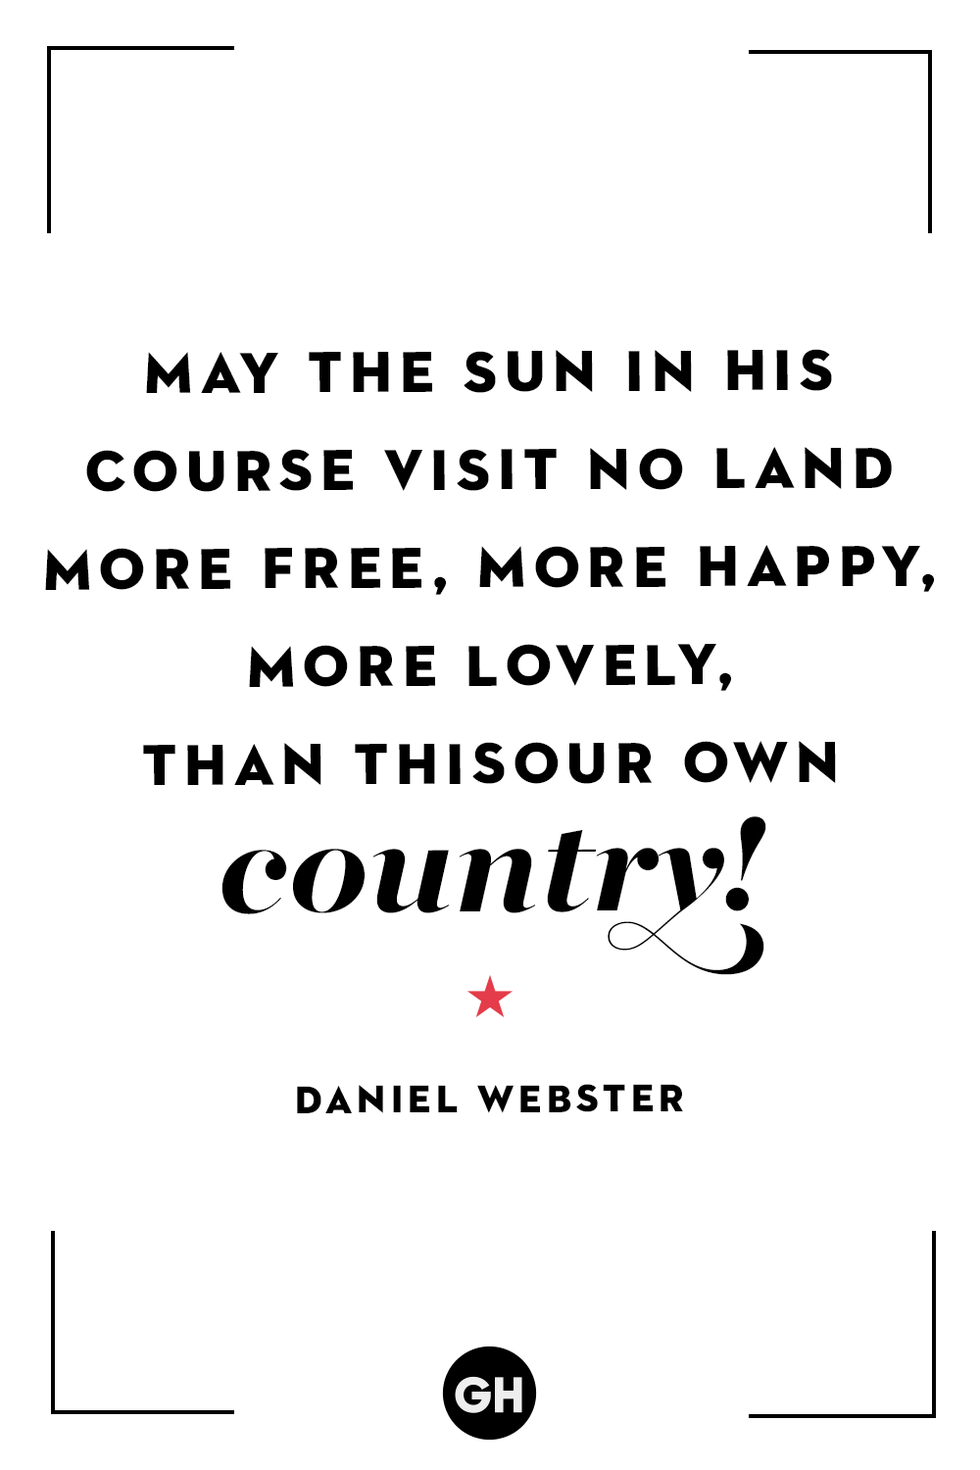 fourth of july quotes